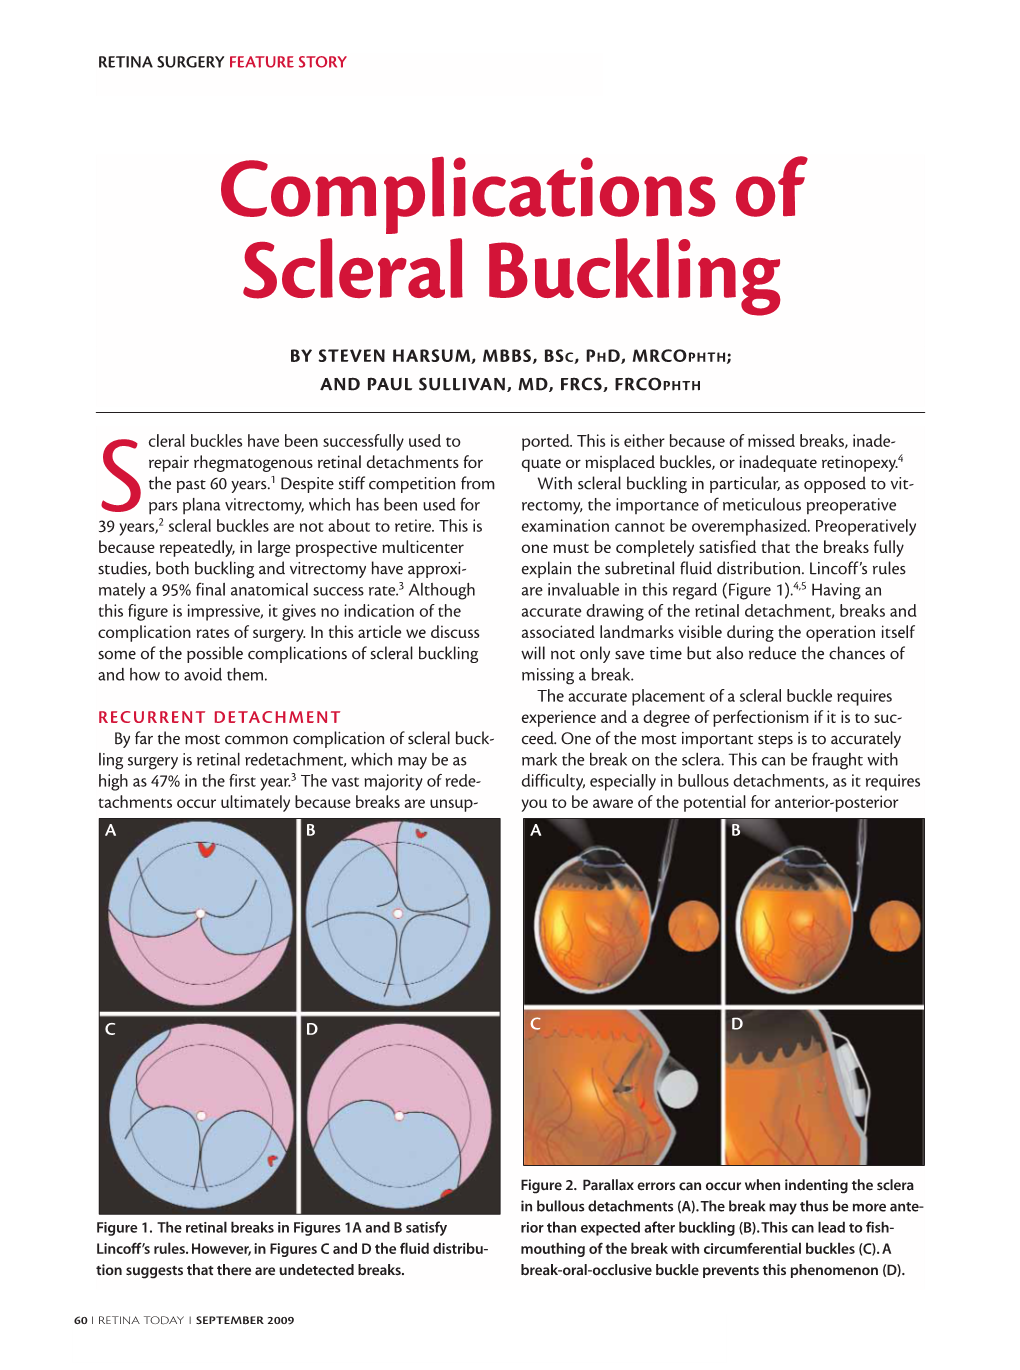 Complications of Scleral Buckling